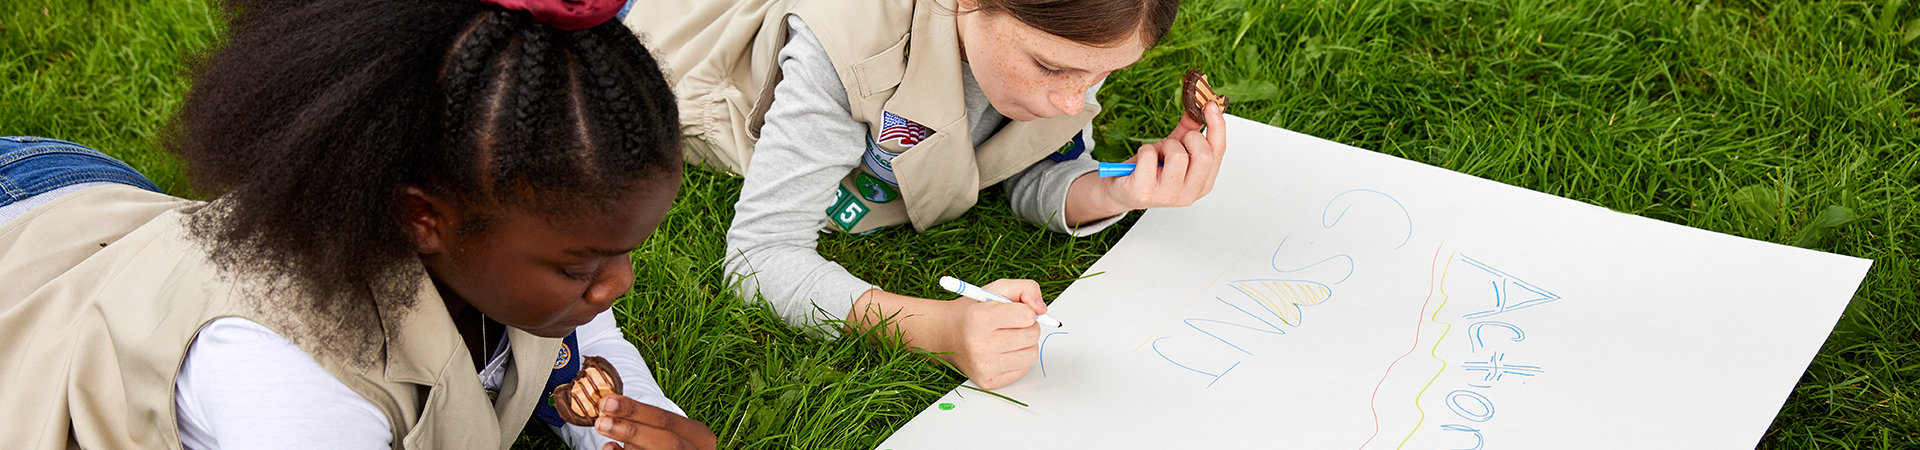  girl scouts creating a poster 